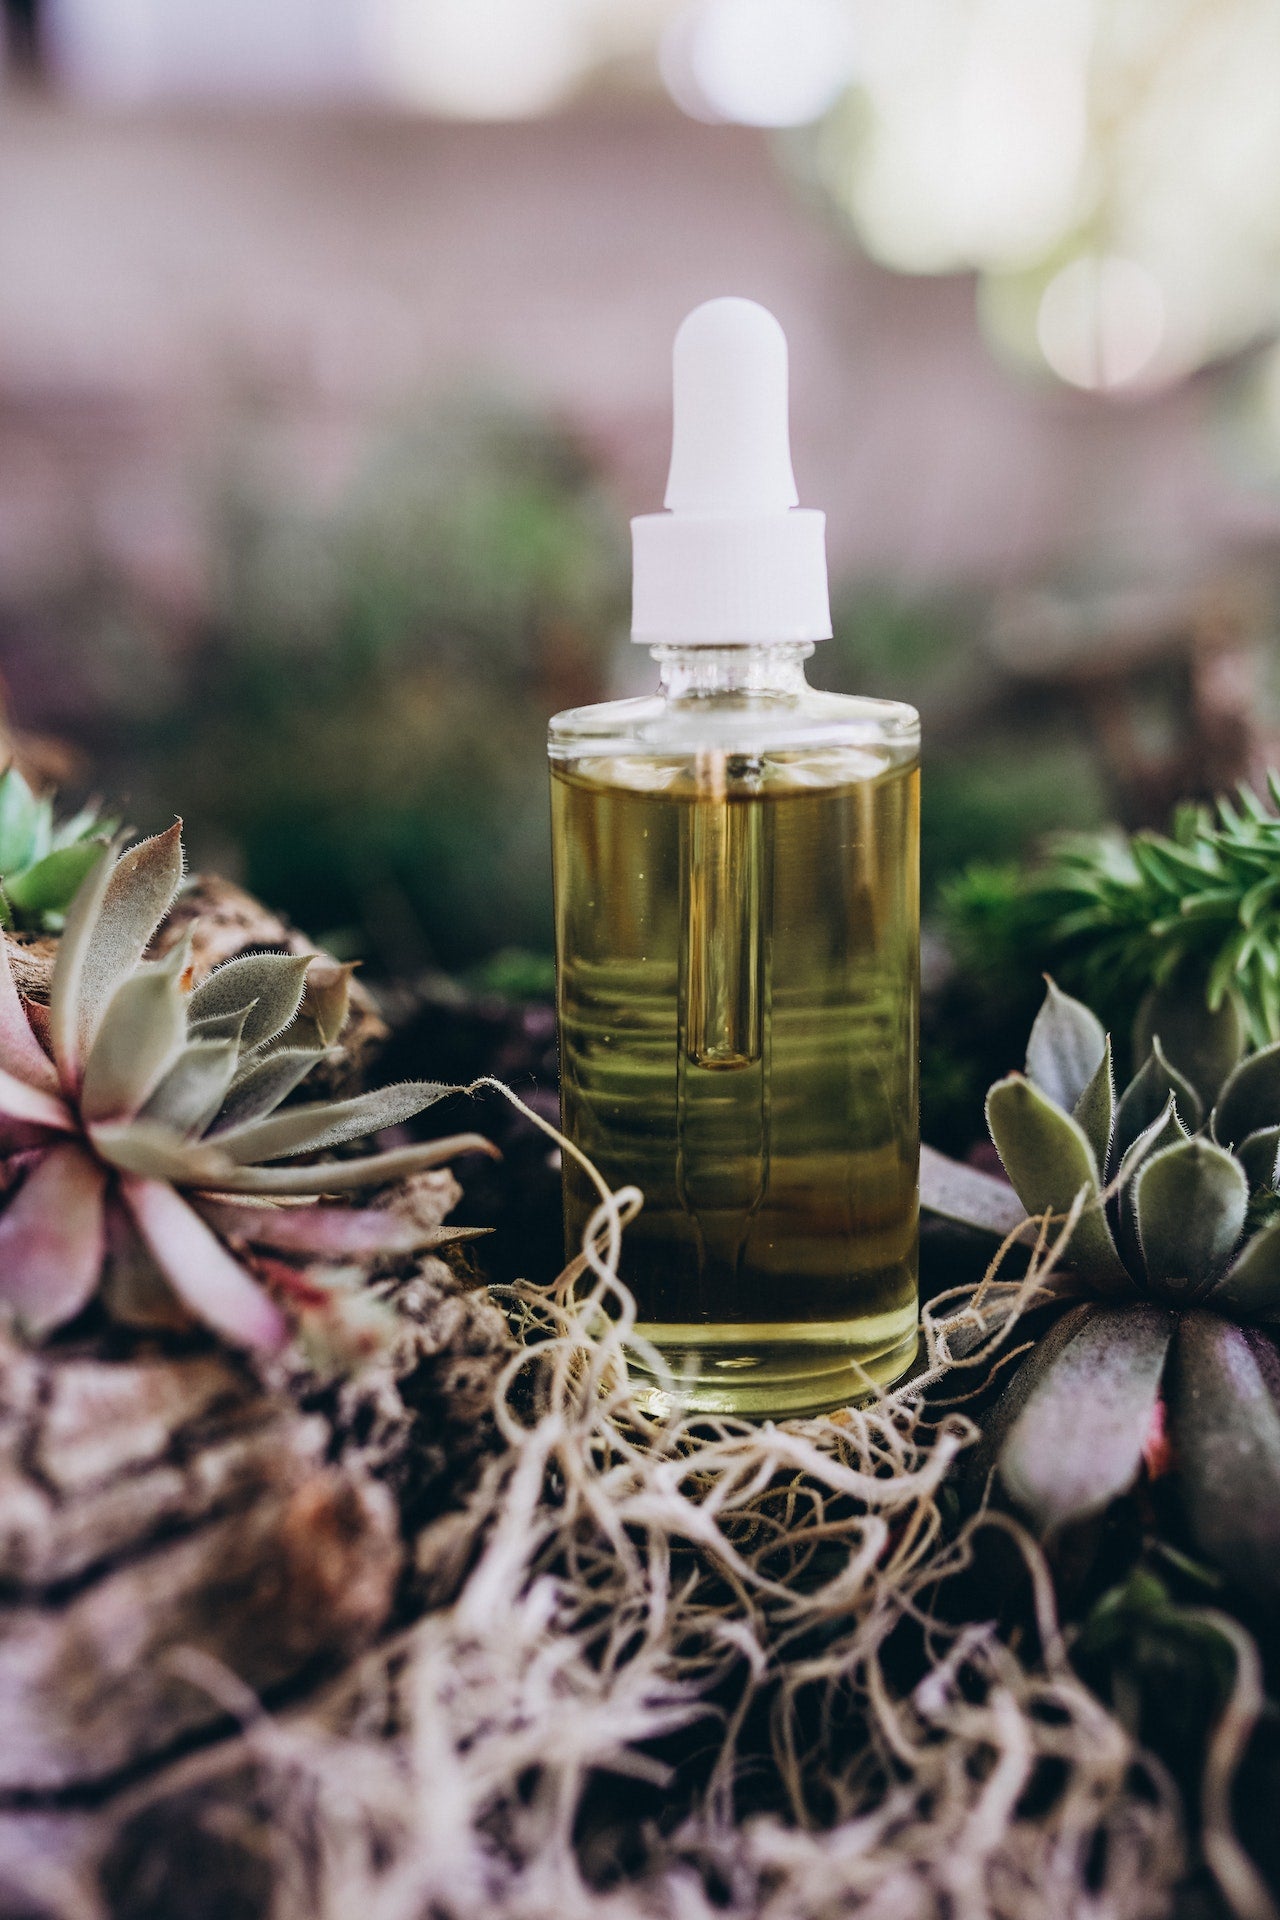 Herb-infused oil in a bottle